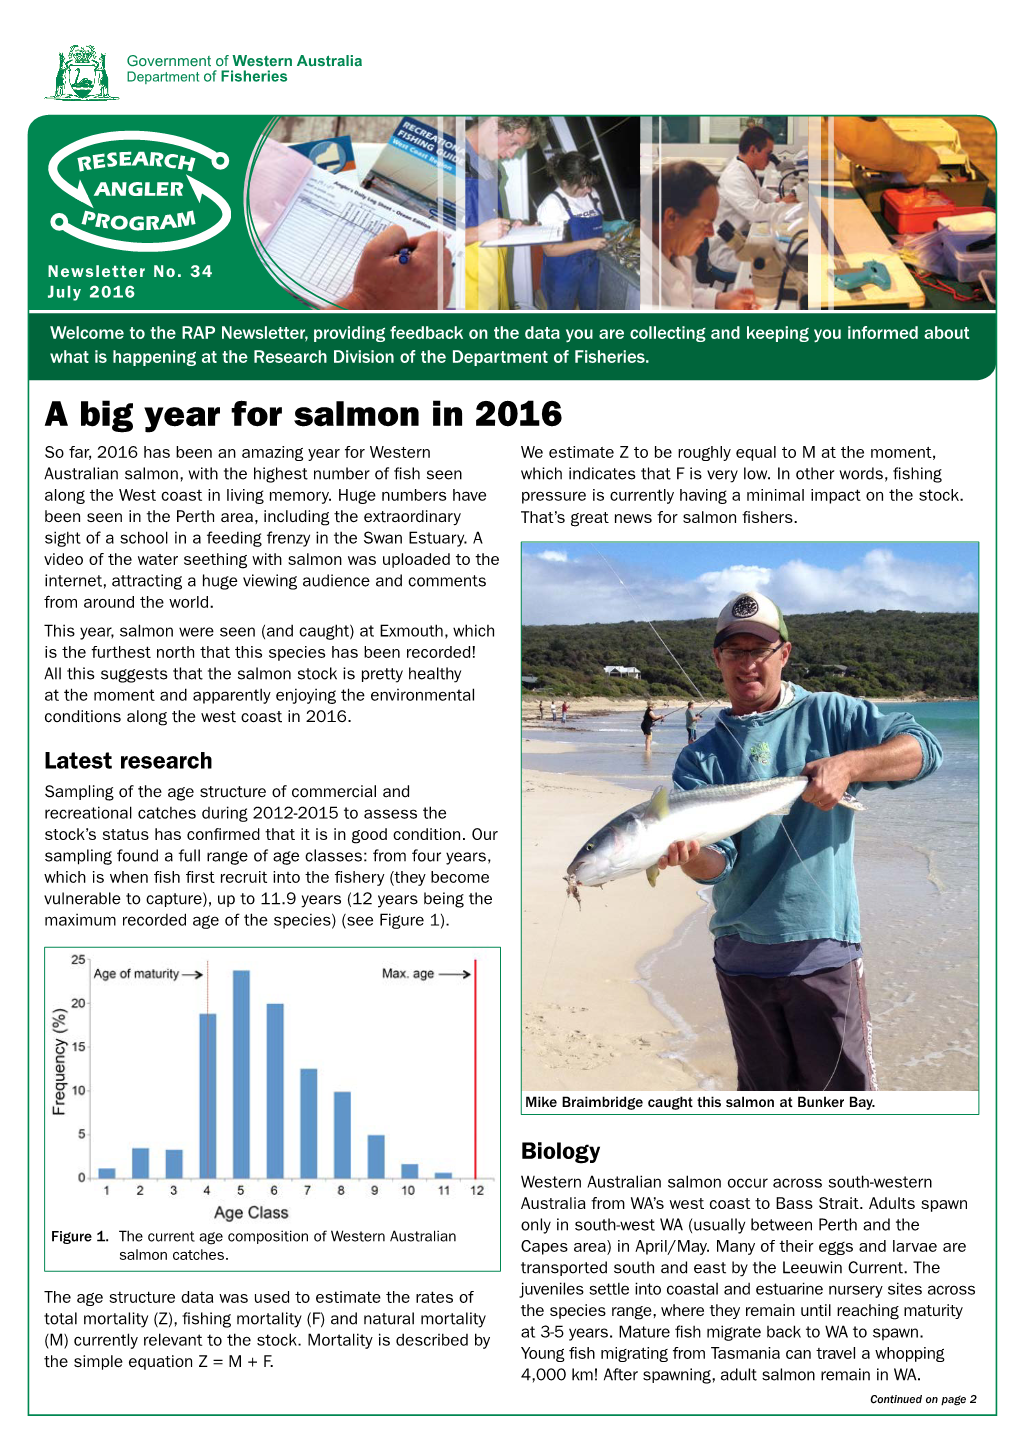 A Big Year for Salmon in 2016